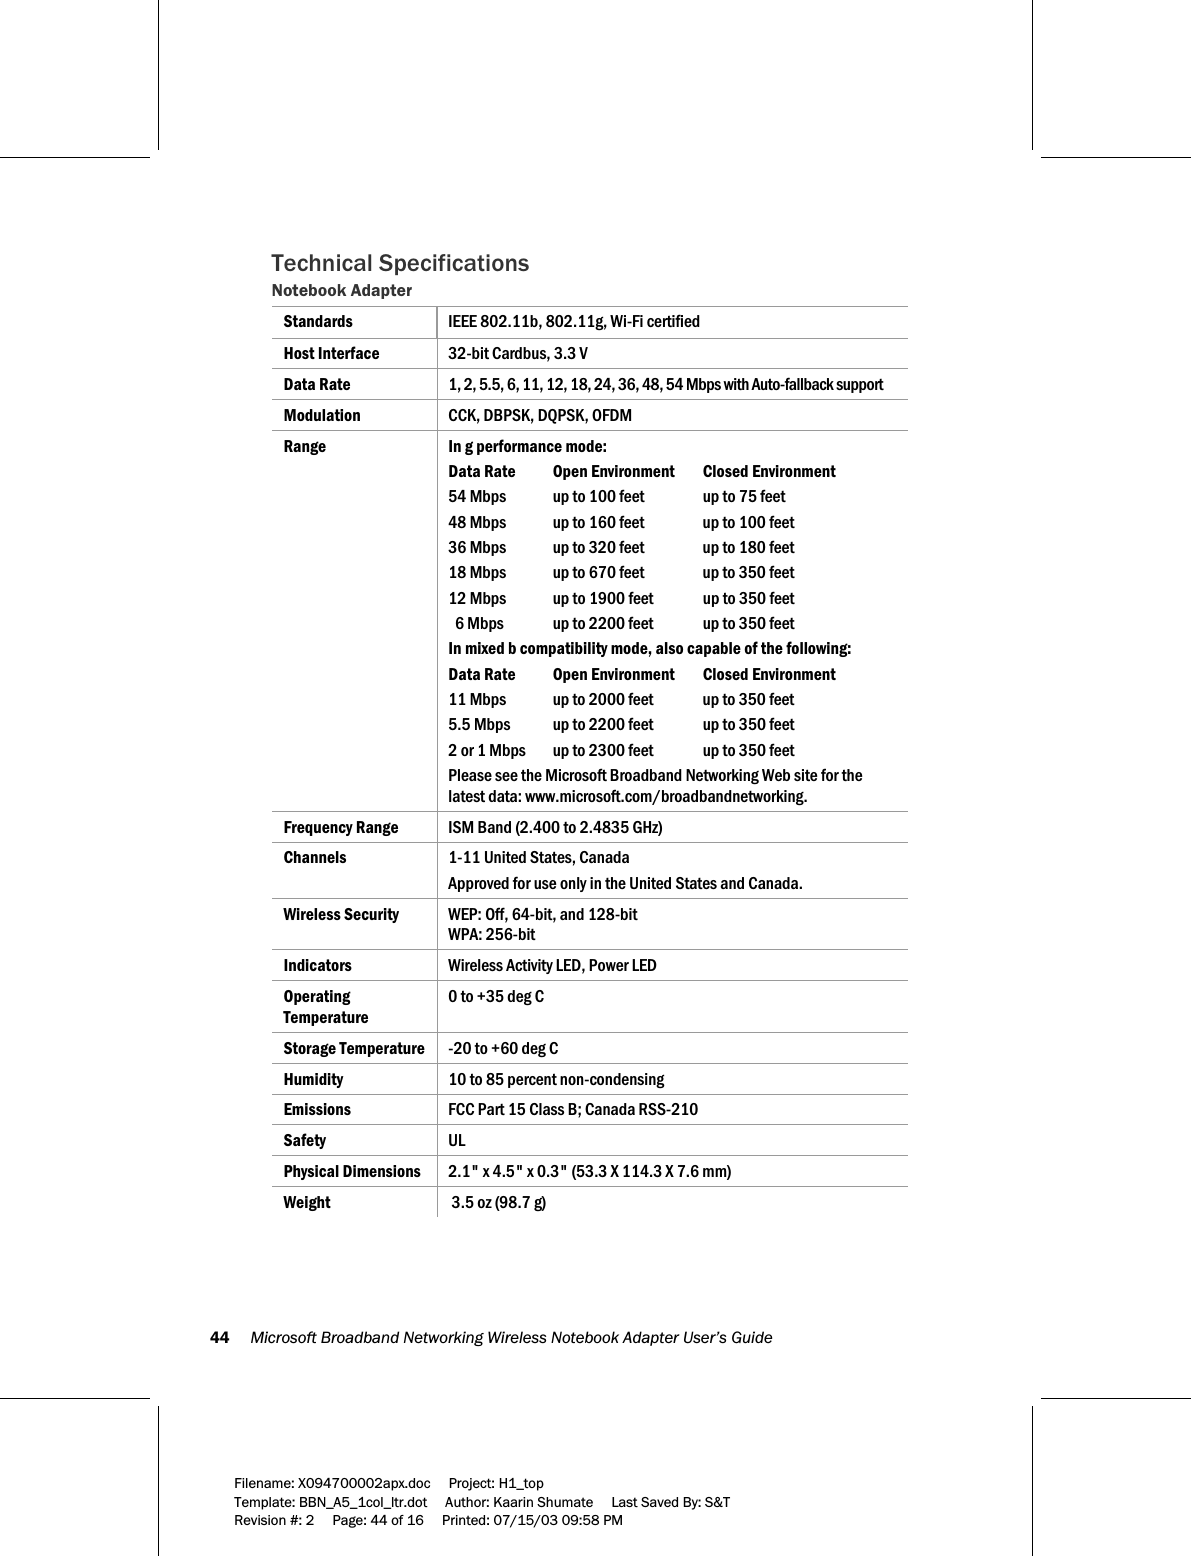 44     Microsoft Broadband Networking Wireless Notebook Adapter User’s Guide  Filename: X094700002apx.doc     Project: H1_top    Template: BBN_A5_1col_ltr.dot     Author: Kaarin Shumate     Last Saved By: S&amp;T Revision #: 2     Page: 44 of 16     Printed: 07/15/03 09:58 PM  Technical Specifications  Notebook Adapter Standards  IEEE 802.11b, 802.11g, Wi-Fi certified Host Interface  32-bit Cardbus, 3.3 V Data Rate   1, 2, 5.5, 6, 11, 12, 18, 24, 36, 48, 54 Mbps with Auto-fallback support Modulation   CCK, DBPSK, DQPSK, OFDM Range  In g performance mode: Data Rate   Open Environment   Closed Environment 54 Mbps  up to 100 feet  up to 75 feet 48 Mbps  up to 160 feet  up to 100 feet 36 Mbps  up to 320 feet  up to 180 feet 18 Mbps  up to 670 feet  up to 350 feet 12 Mbps  up to 1900 feet  up to 350 feet   6 Mbps  up to 2200 feet  up to 350 feet In mixed b compatibility mode, also capable of the following: Data Rate   Open Environment   Closed Environment 11 Mbps  up to 2000 feet  up to 350 feet 5.5 Mbps  up to 2200 feet  up to 350 feet 2 or 1 Mbps  up to 2300 feet  up to 350 feet Please see the Microsoft Broadband Networking Web site for the latest data: www.microsoft.com/broadbandnetworking. Frequency Range  ISM Band (2.400 to 2.4835 GHz) Channels  1-11 United States, Canada Approved for use only in the United States and Canada. Wireless Security  WEP: Off, 64-bit, and 128-bit WPA: 256-bit Indicators  Wireless Activity LED, Power LED Operating Temperature 0 to +35 deg C Storage Temperature  -20 to +60 deg C Humidity  10 to 85 percent non-condensing Emissions  FCC Part 15 Class B; Canada RSS-210 Safety  UL Physical Dimensions  2.1&quot; x 4.5&quot; x 0.3&quot; (53.3 X 114.3 X 7.6 mm) Weight   3.5 oz (98.7 g) 